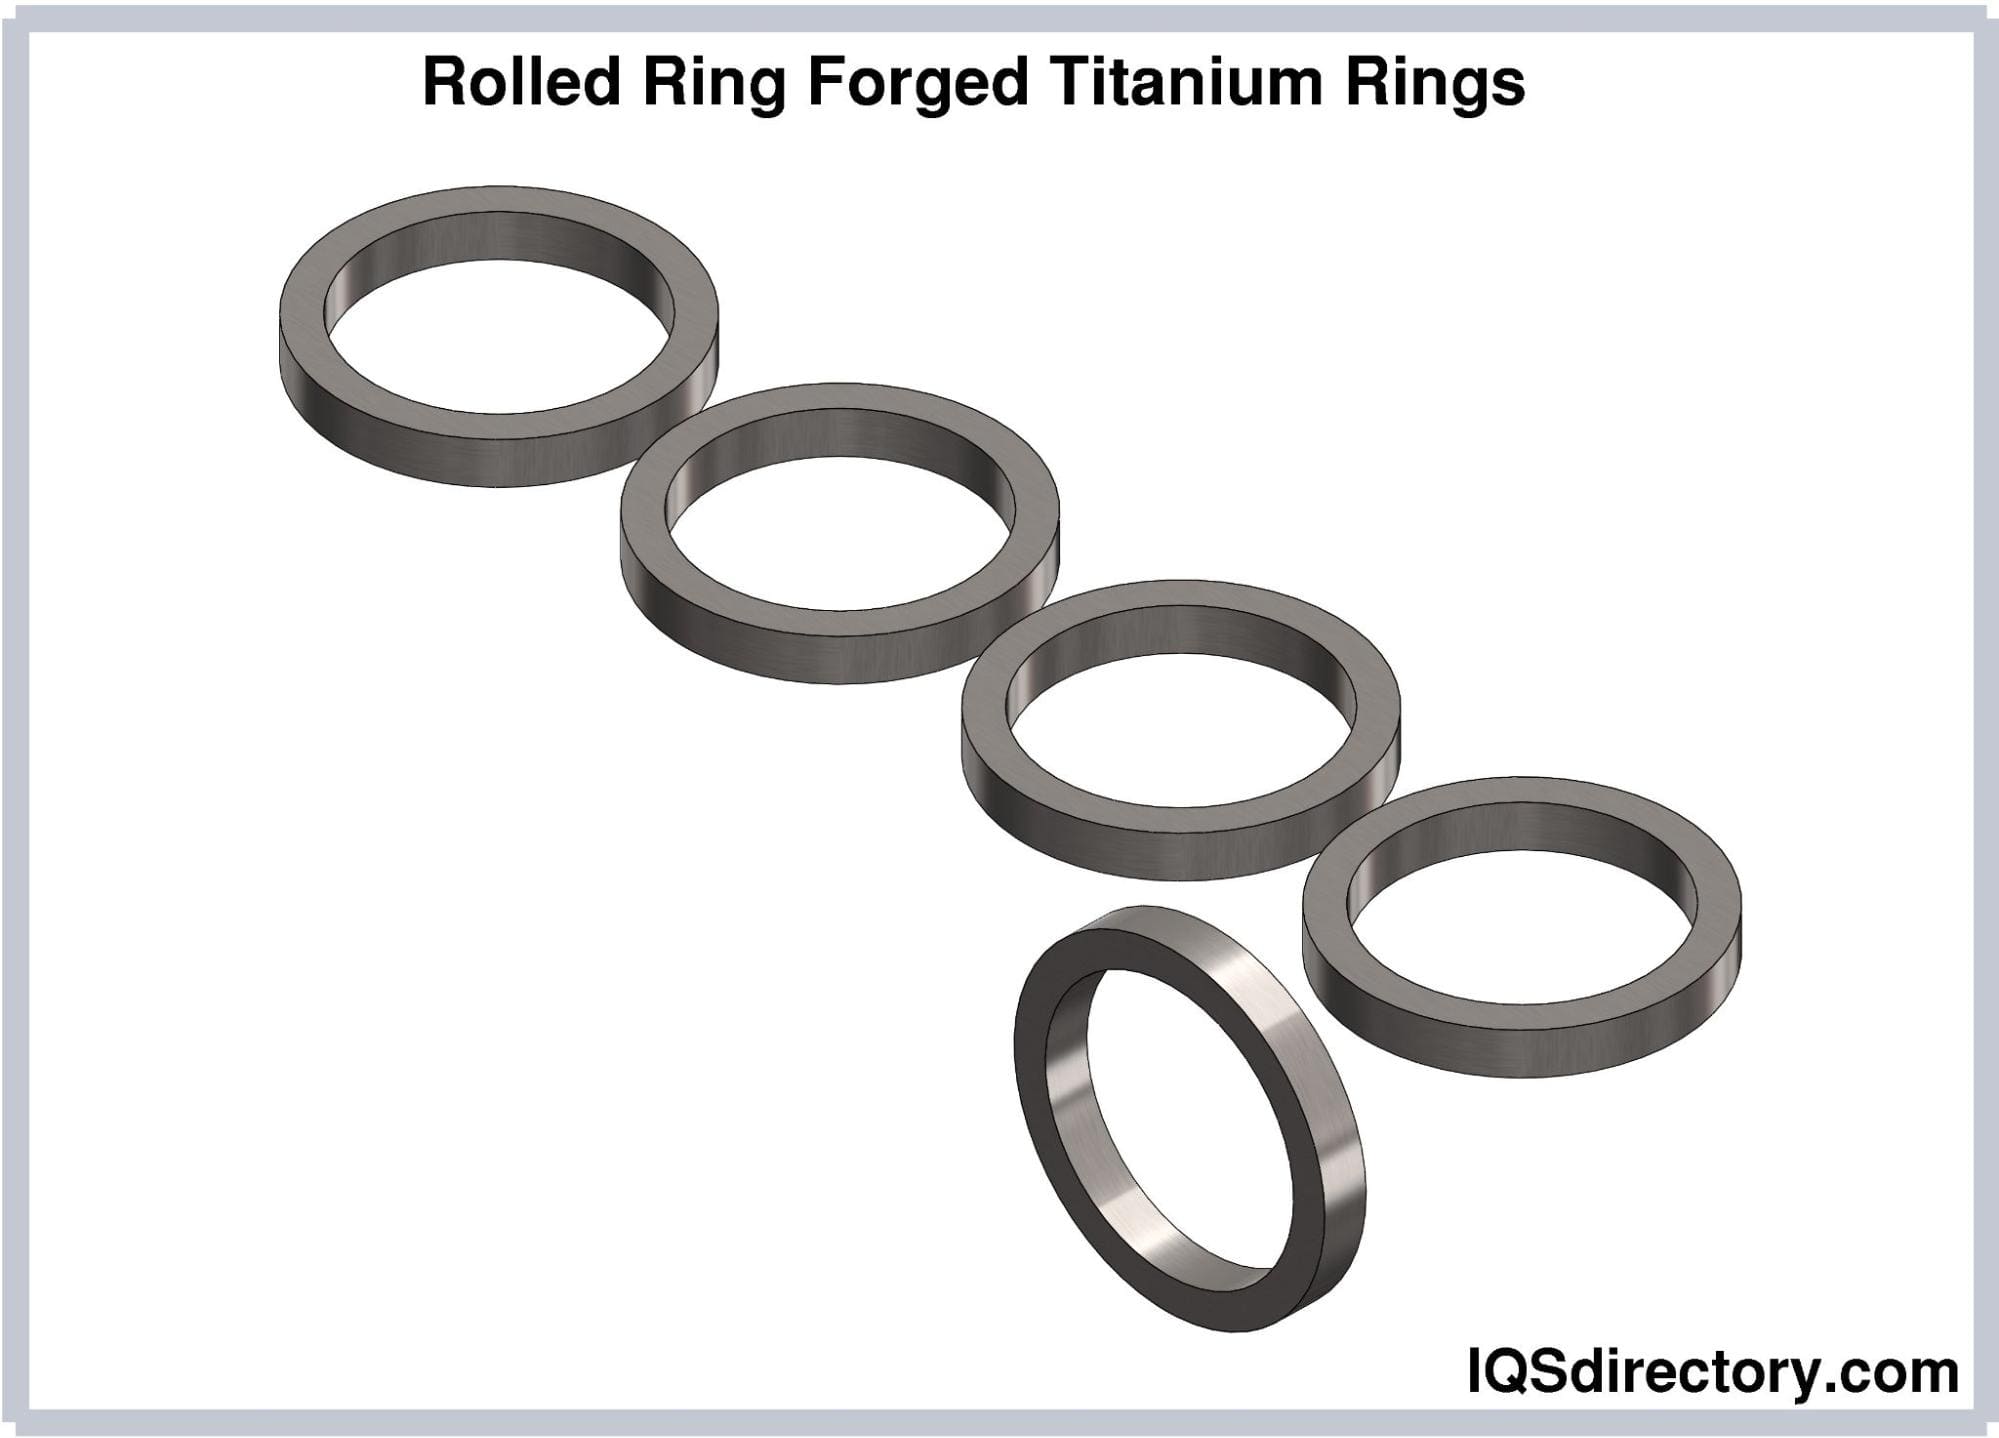 Rolled Ring Forged Titanium Rings